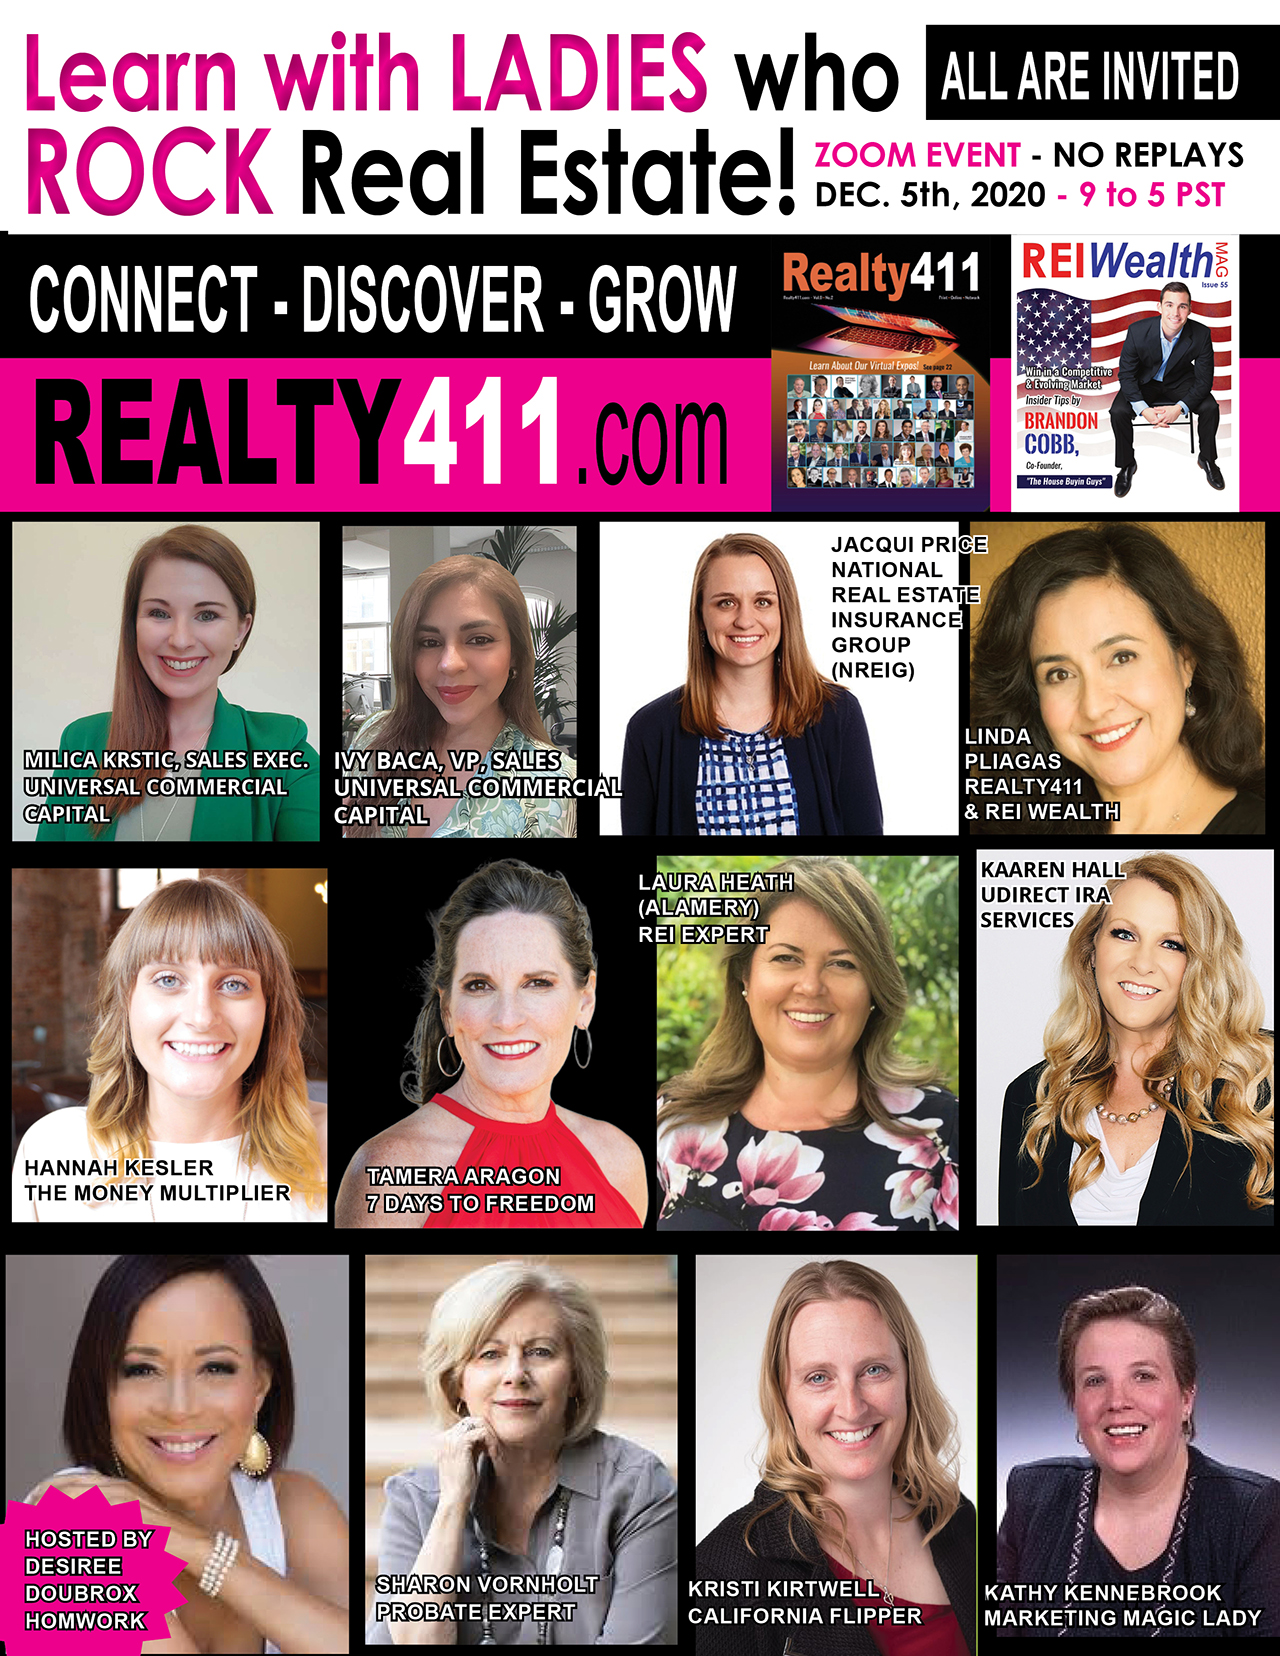 learn with ladies who rock real estate